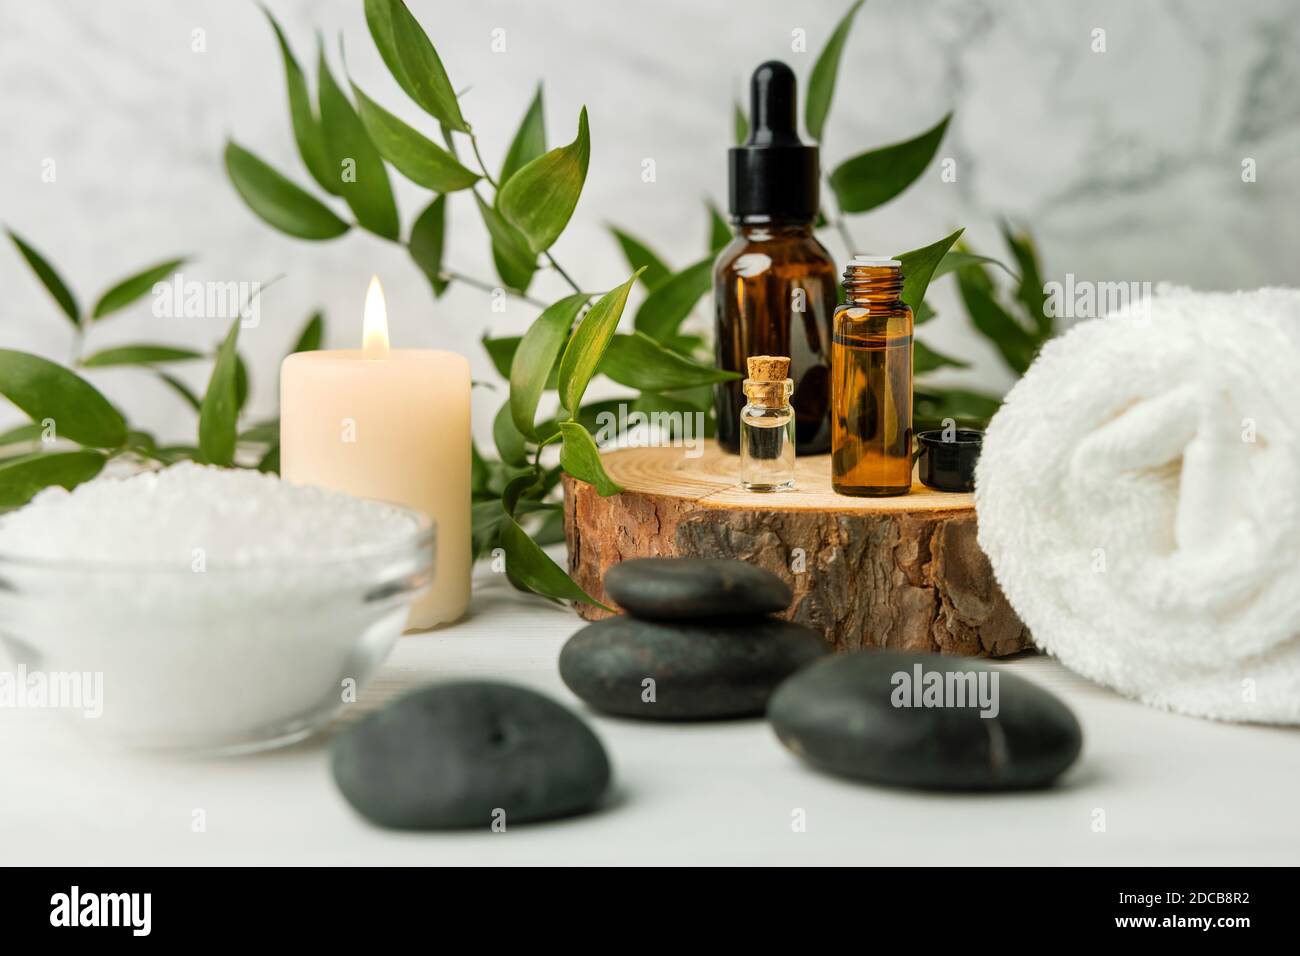 beauty treatment items for spa procedures on white wooden table with green plant. massage stones, essential oils and sea salt with burning candle Stock Photo